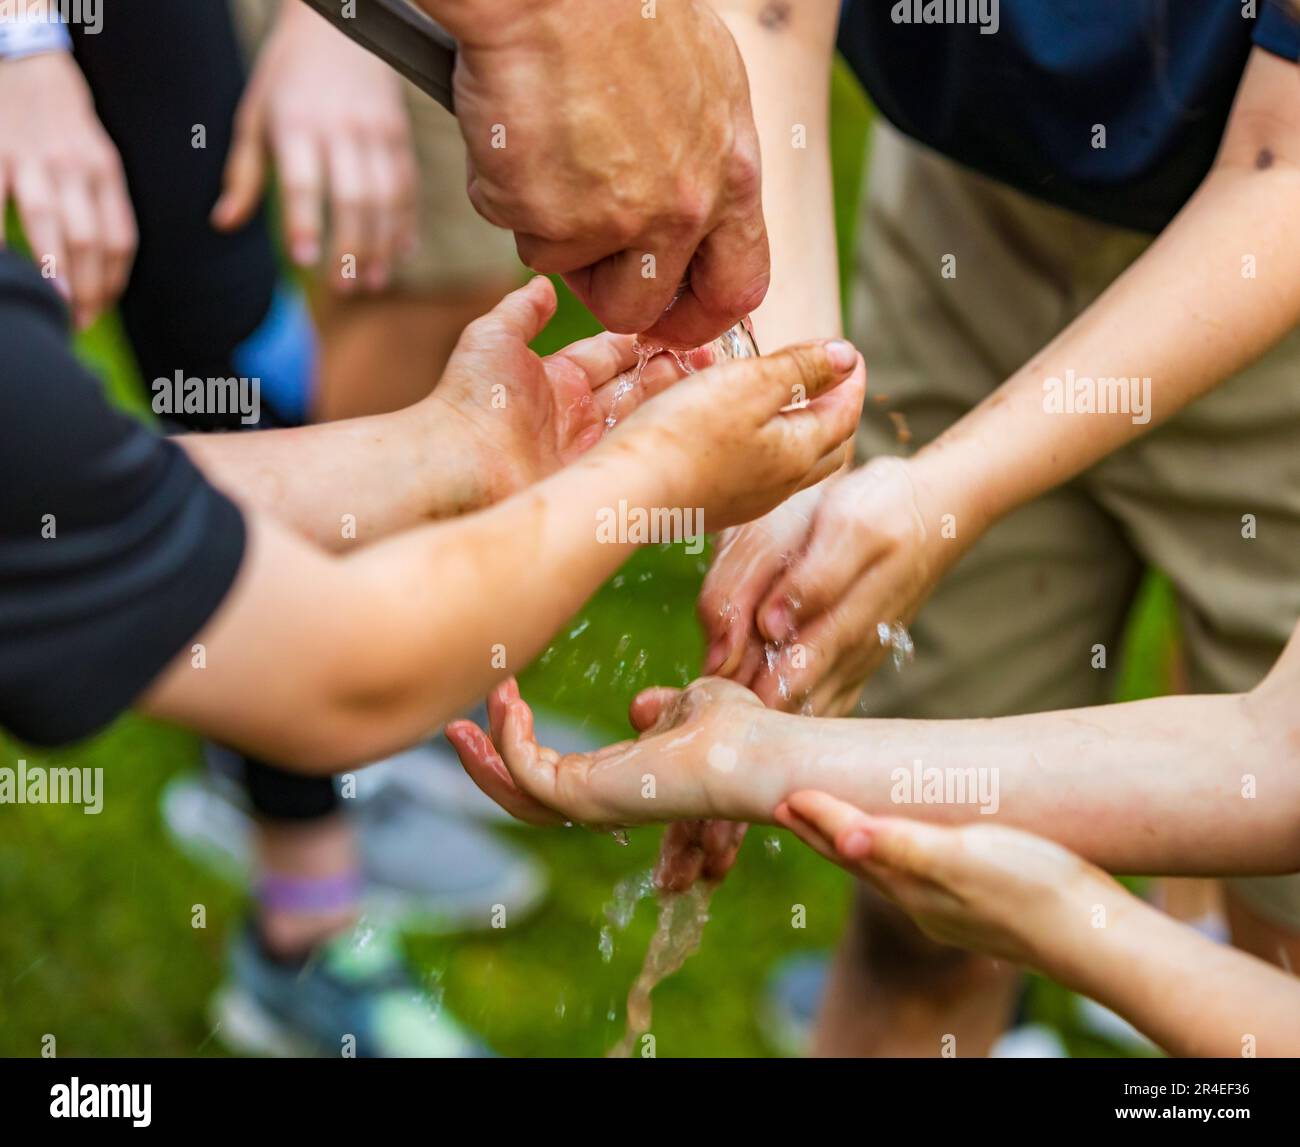 Children outside washing hands with water from garden hose. Stock Photo